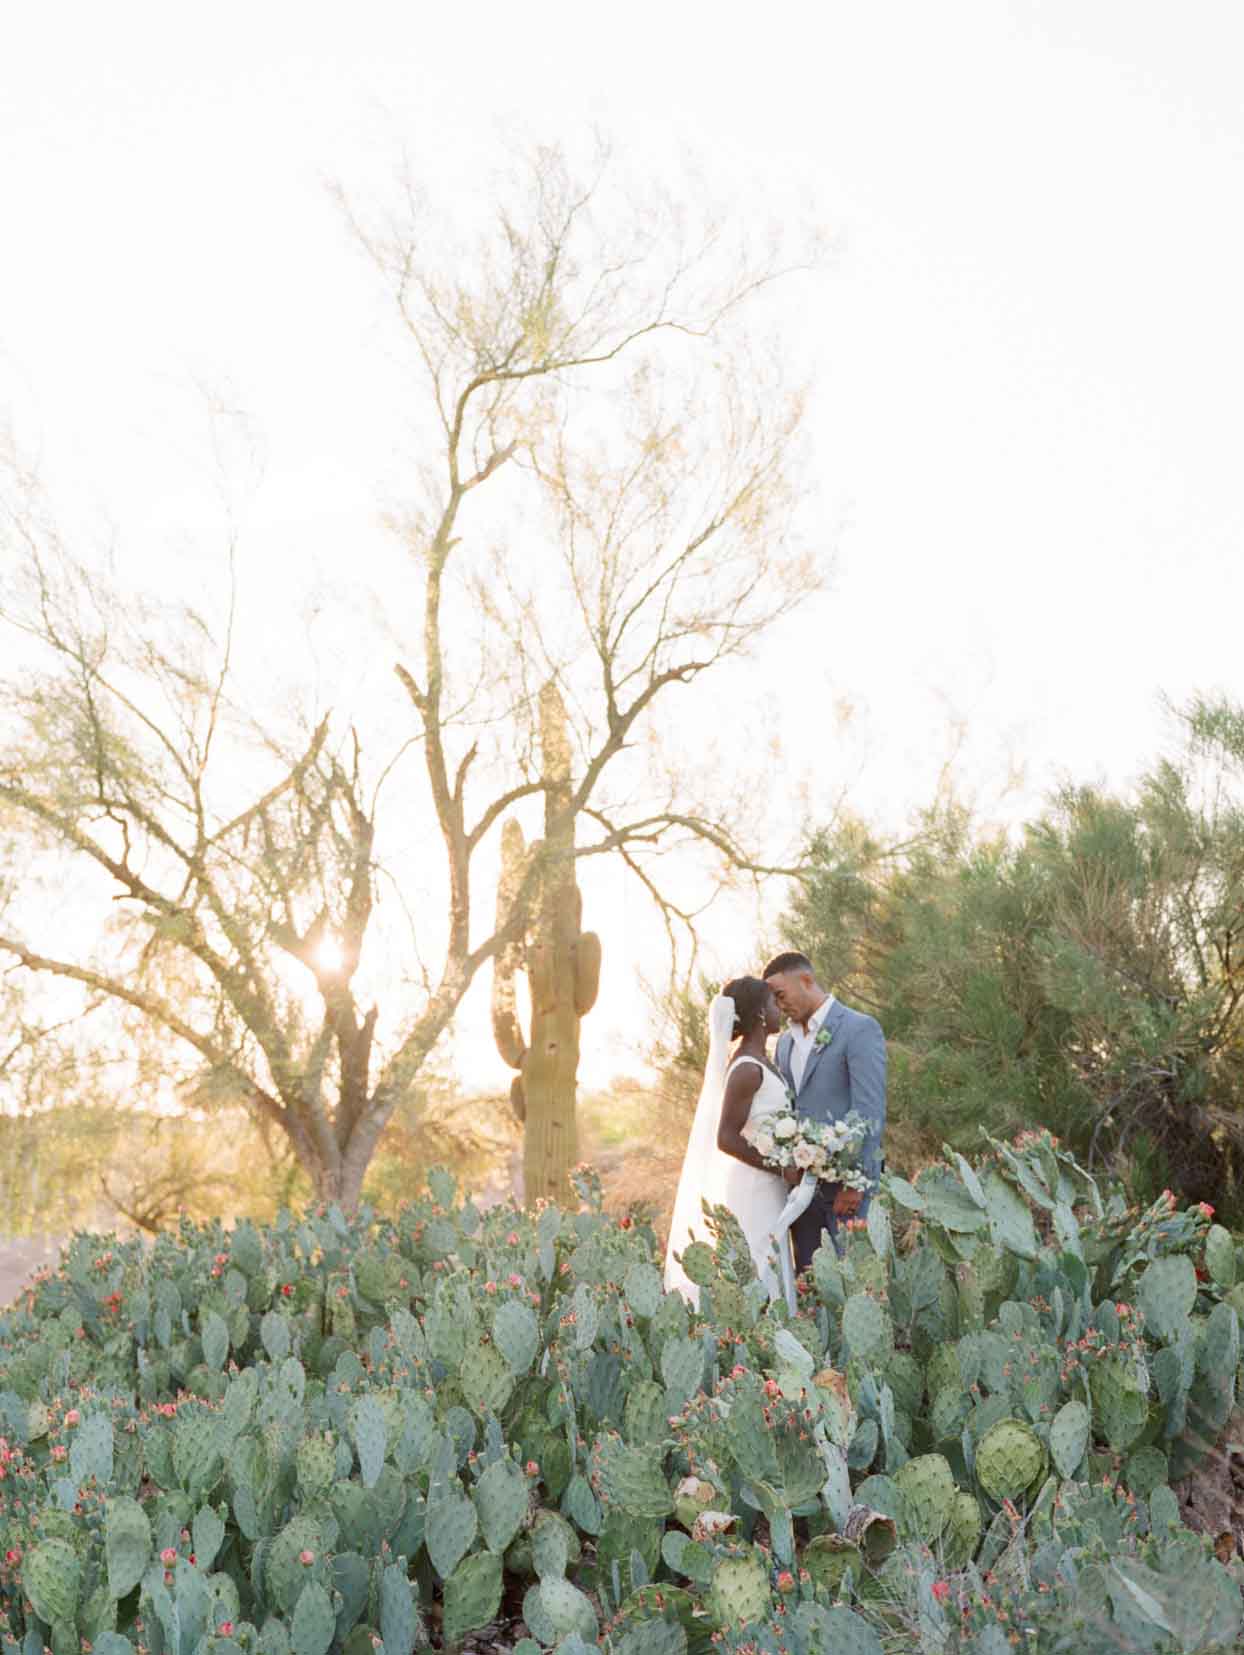 The Beautiful Newlyweds in The Cactus Garden at Palm Valley by. Wedgewood Weddings